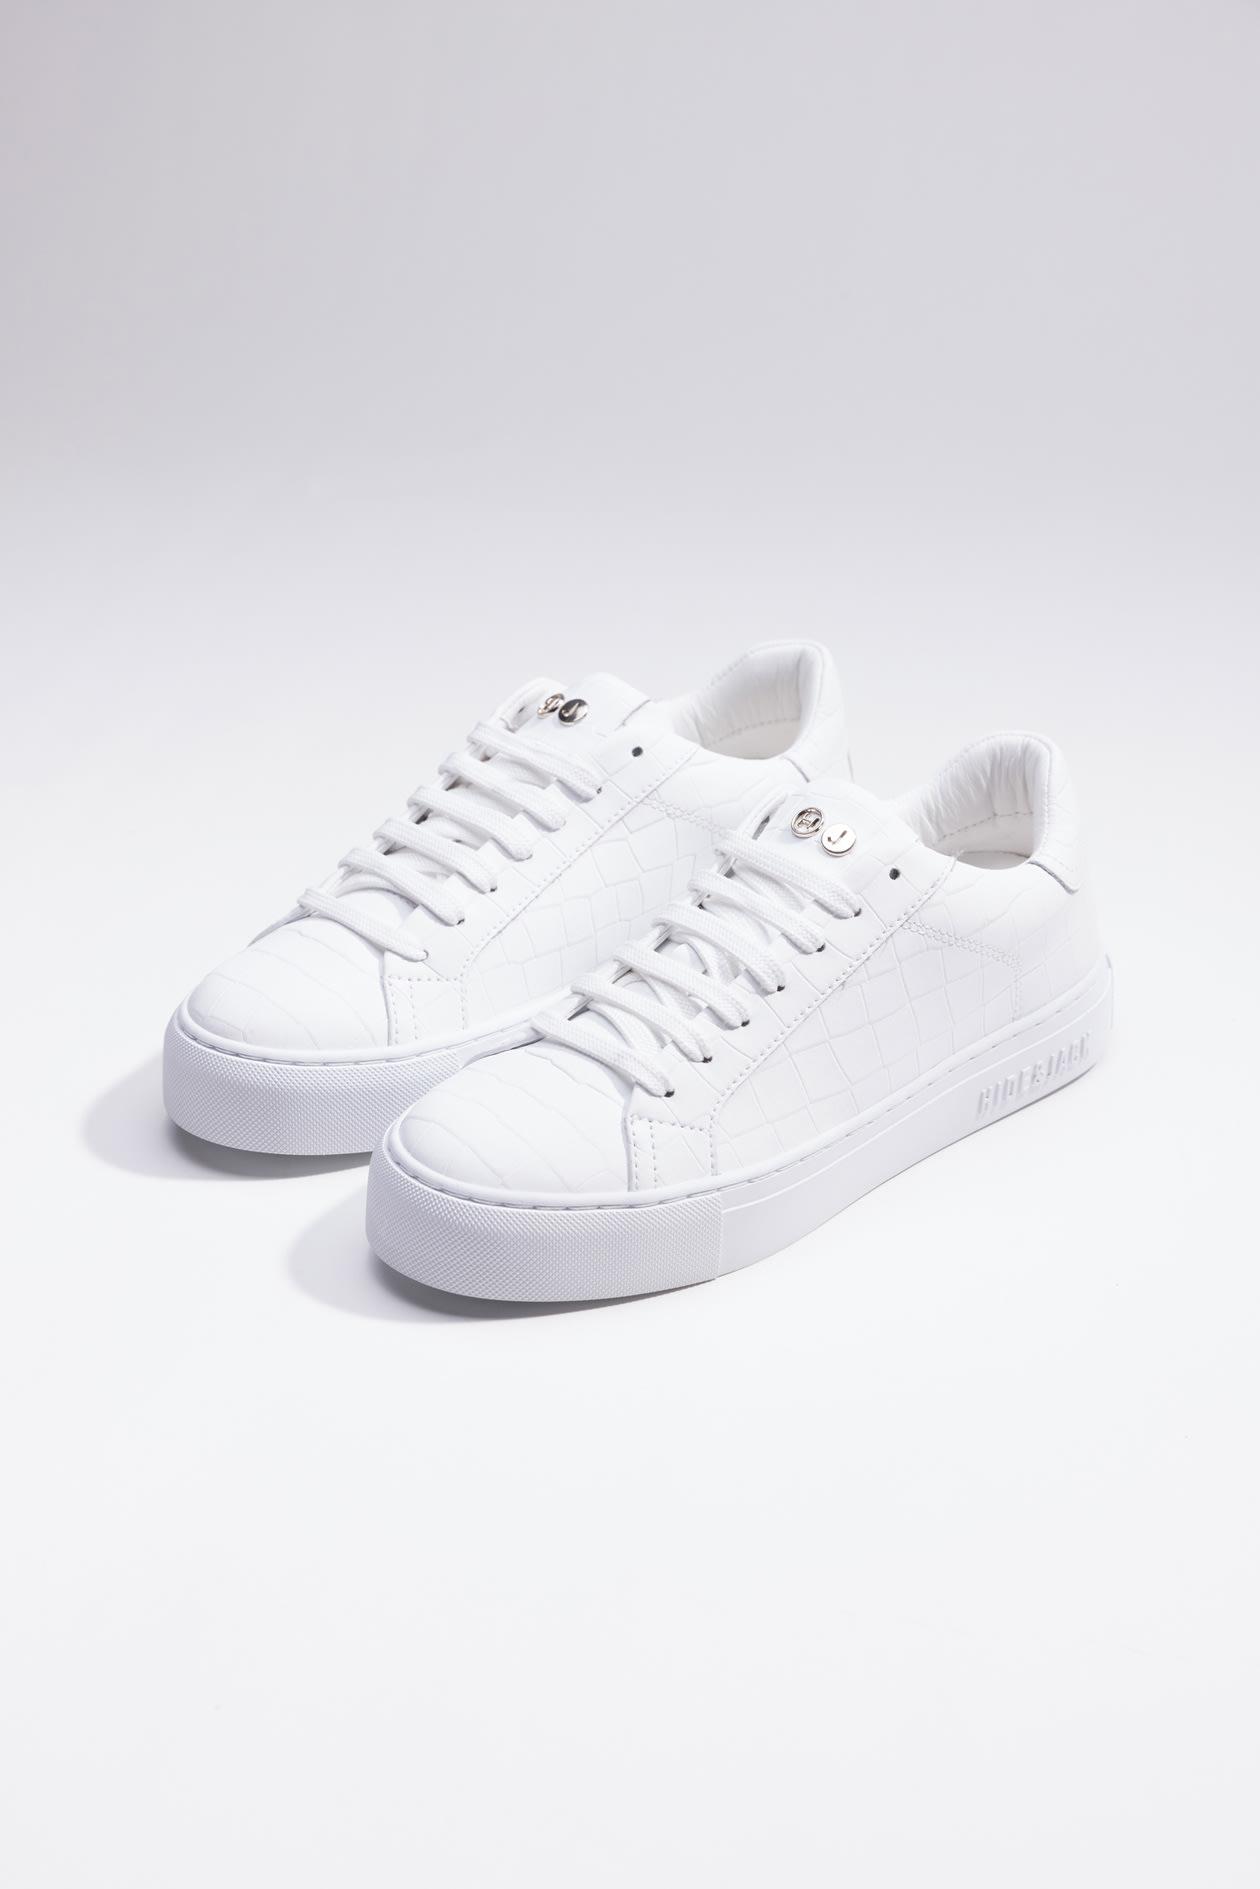 Hide&amp;jack Low Top Trainer - Essence Tuscany White